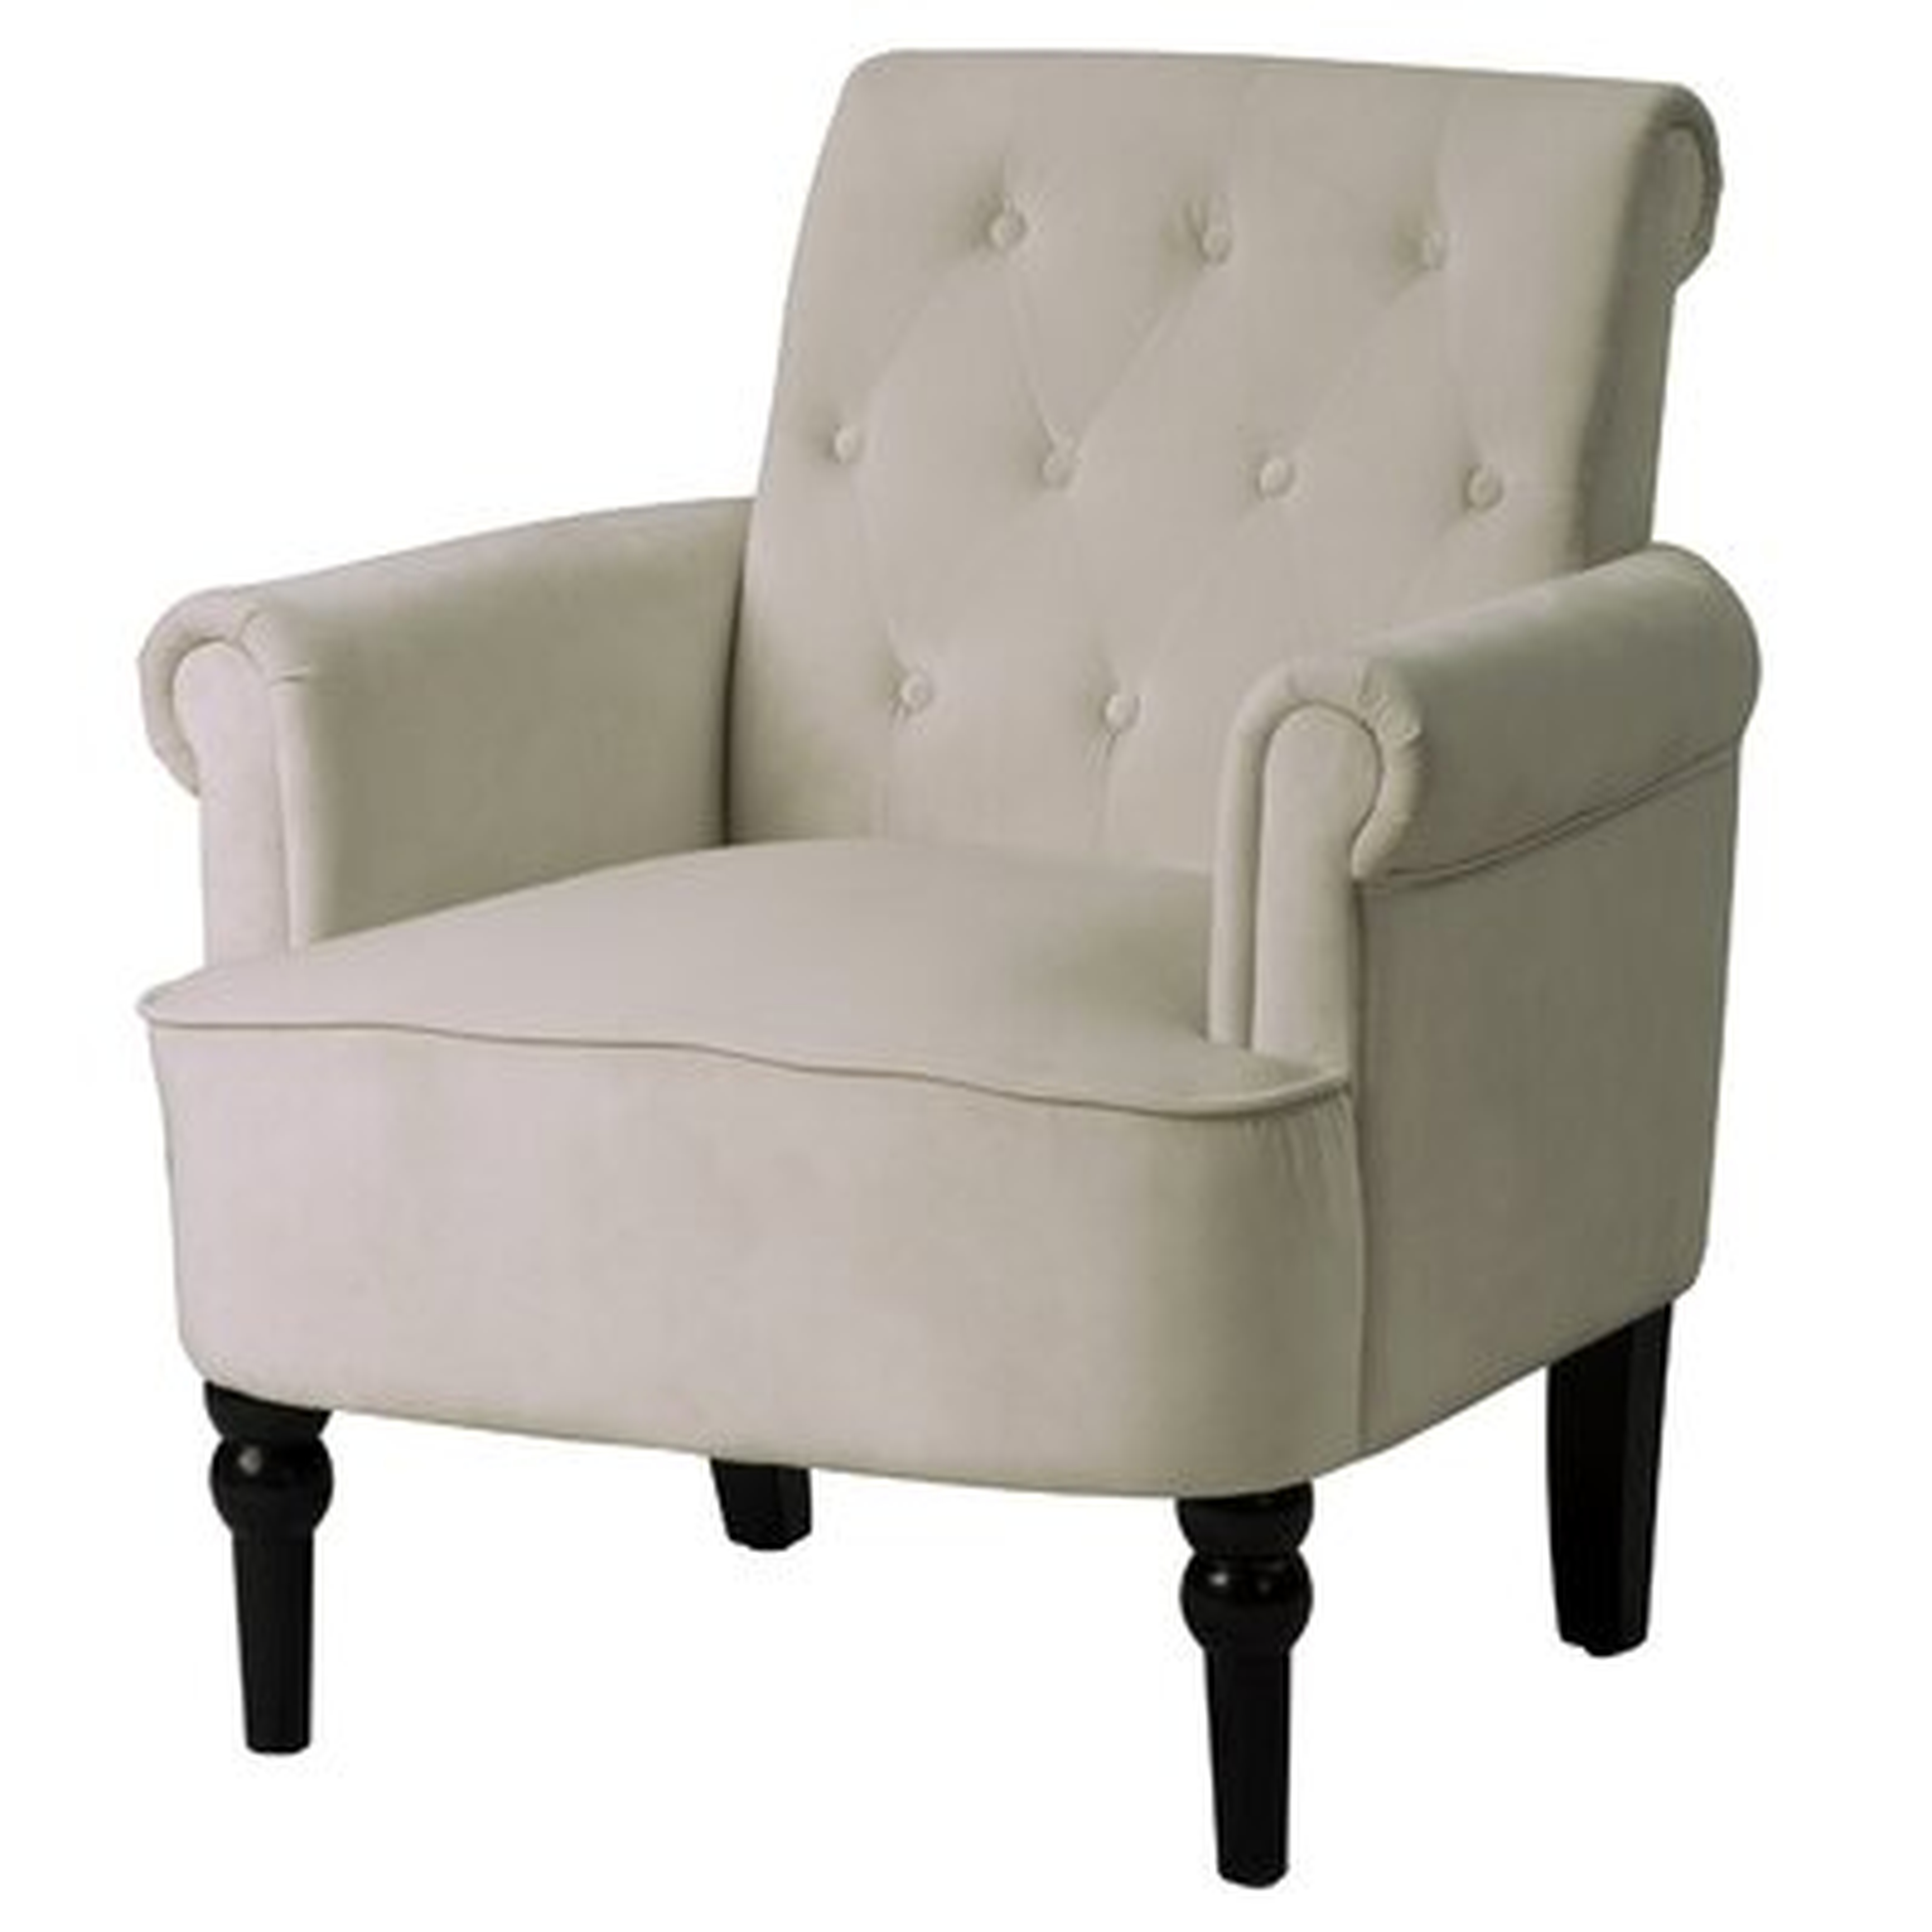 Elegant Button Tufted Club Chair Accent Armchairs Roll Arm Living Room Cushion With Wooden Legs - Wayfair